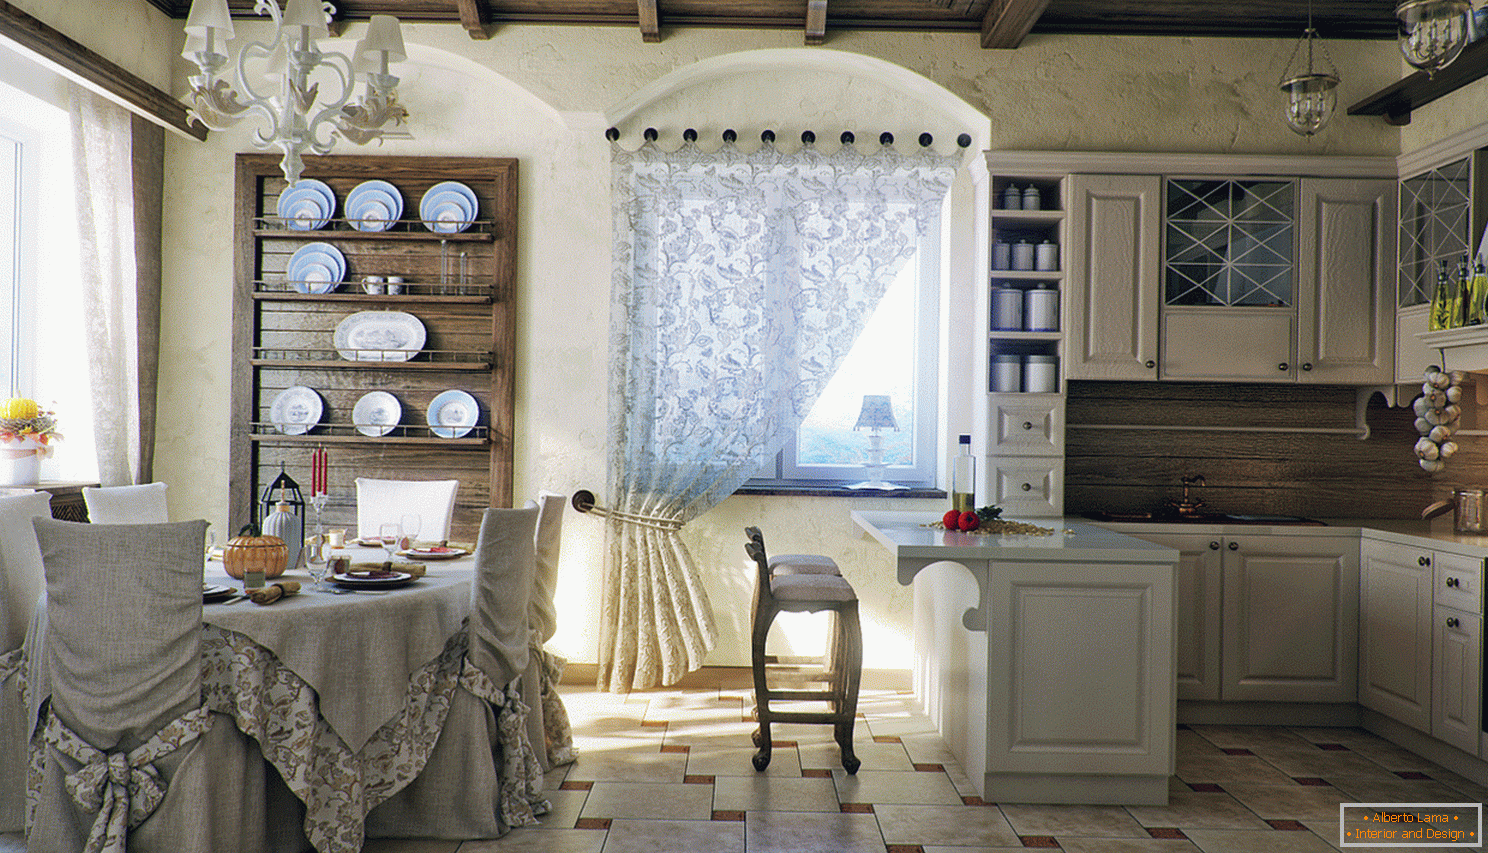 Kitchen and dining room in country style